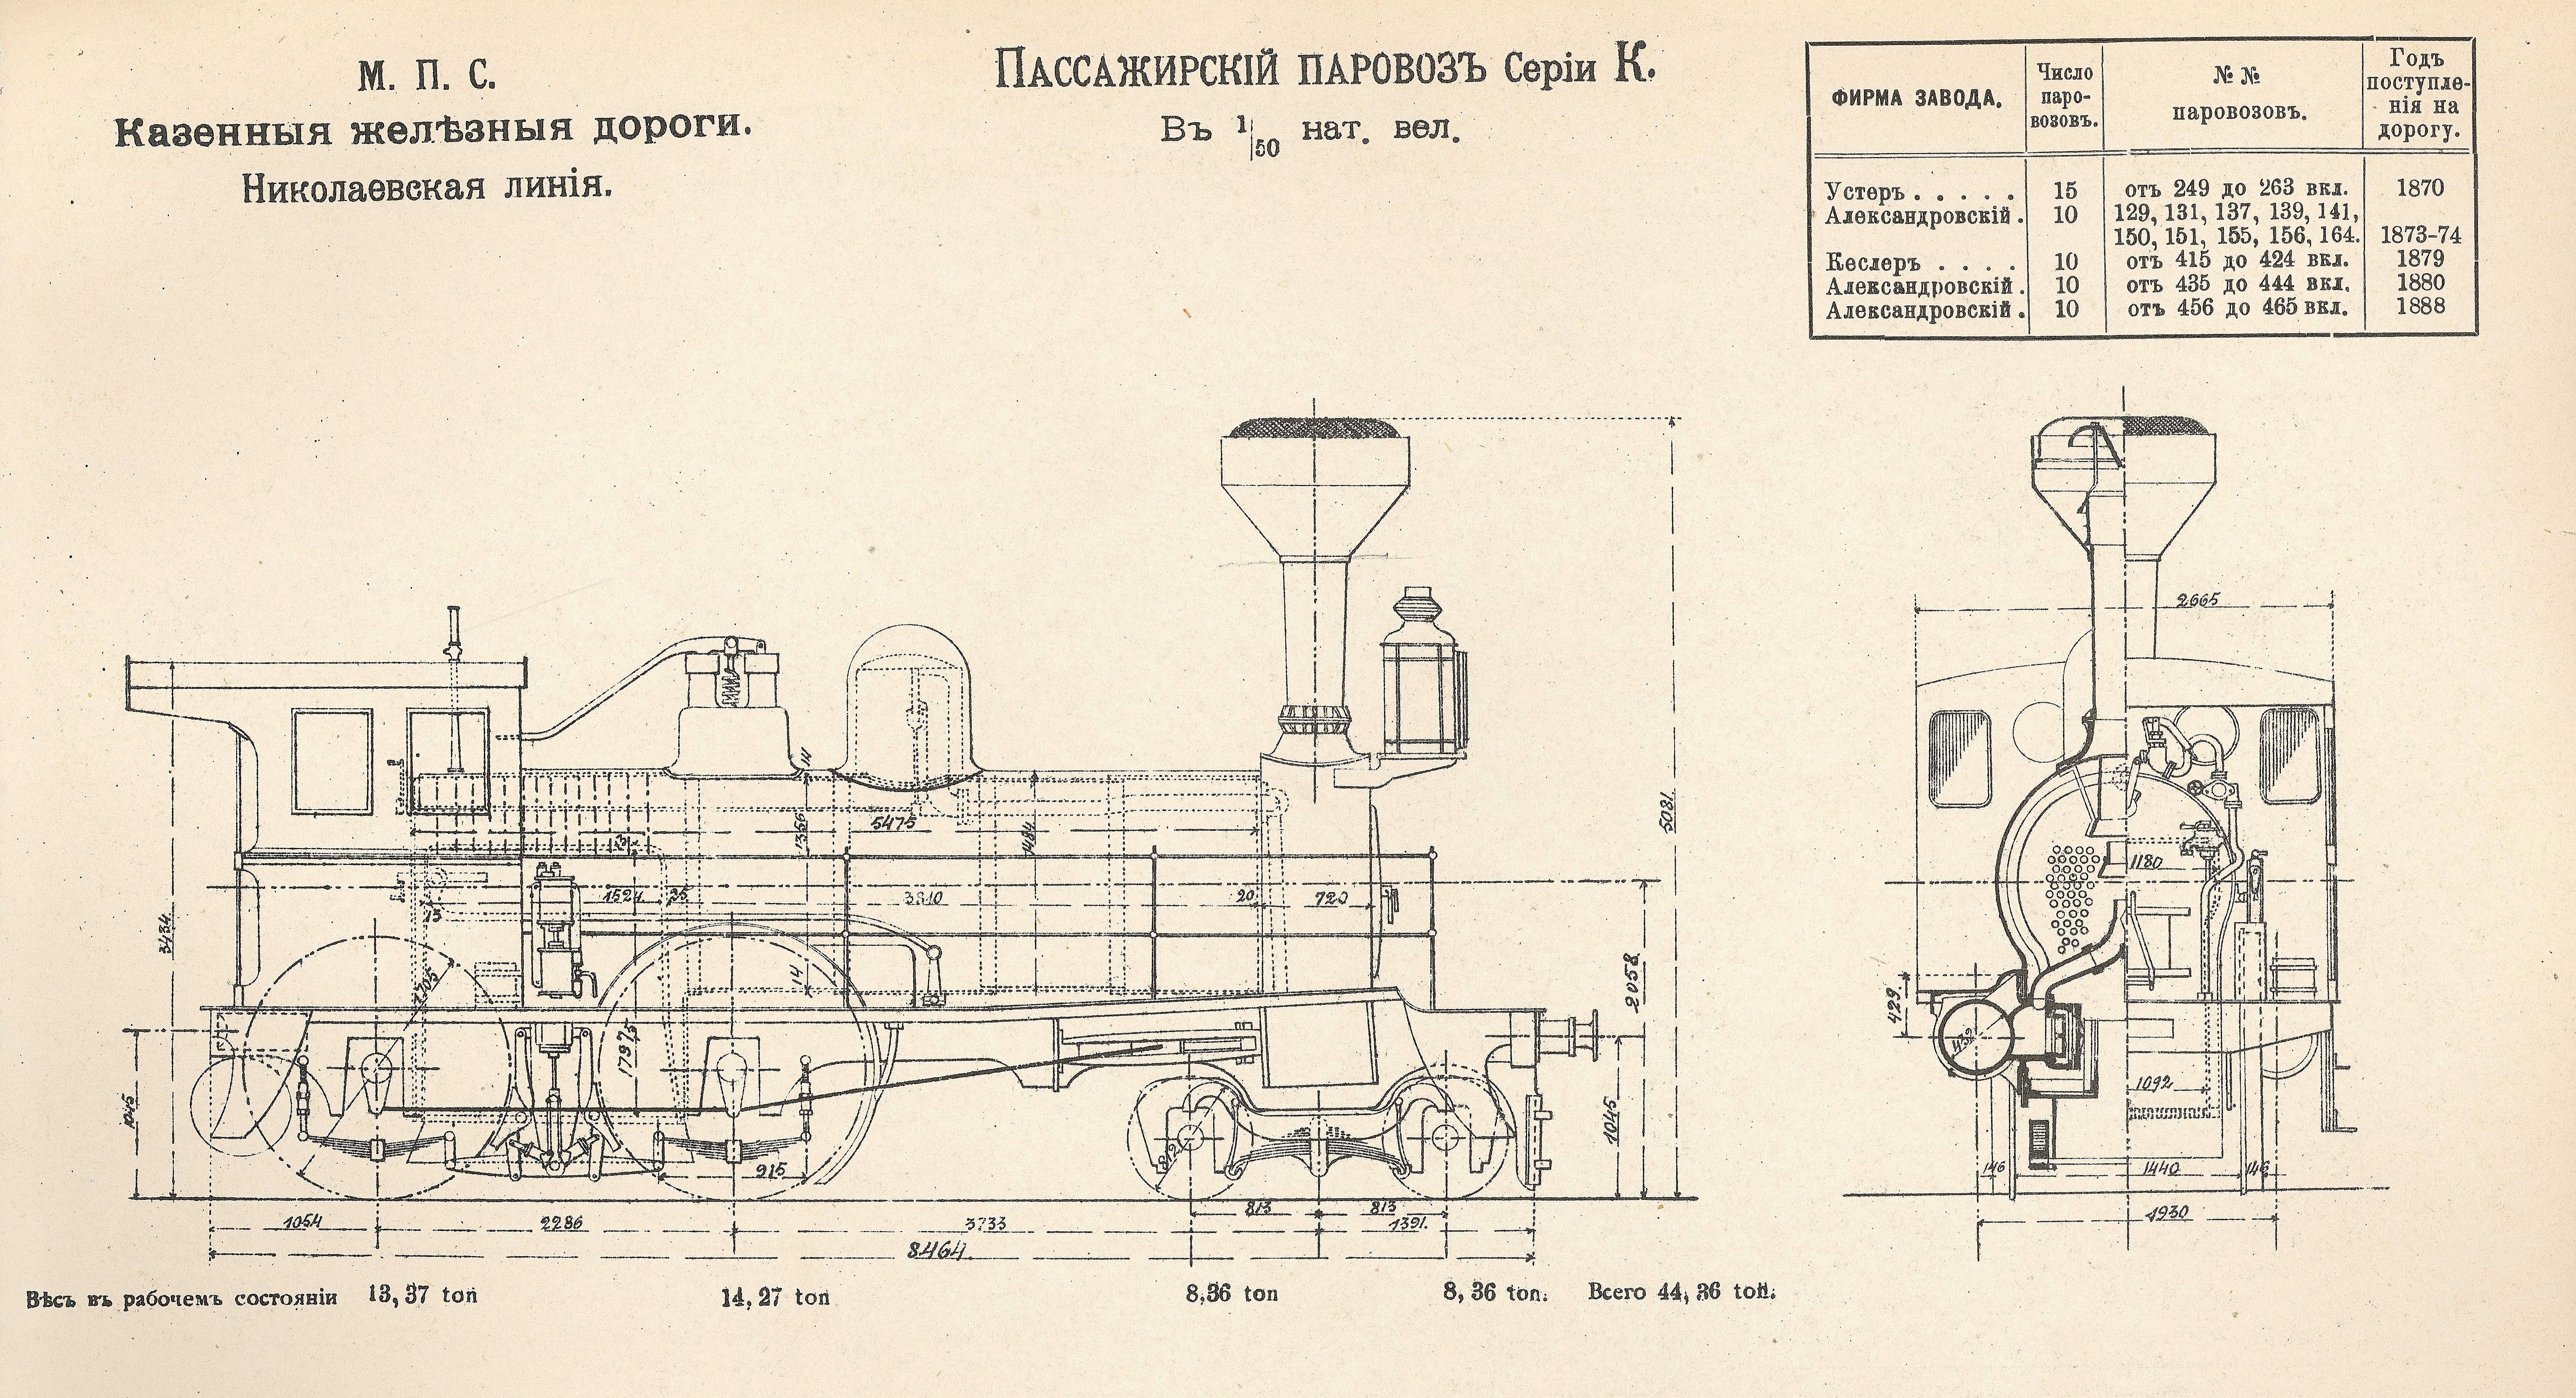 Series K Engine (diagram), which could have plausibly been the locomotive that pulled Anna's train (JPG), courtesy Sergei Kiselev